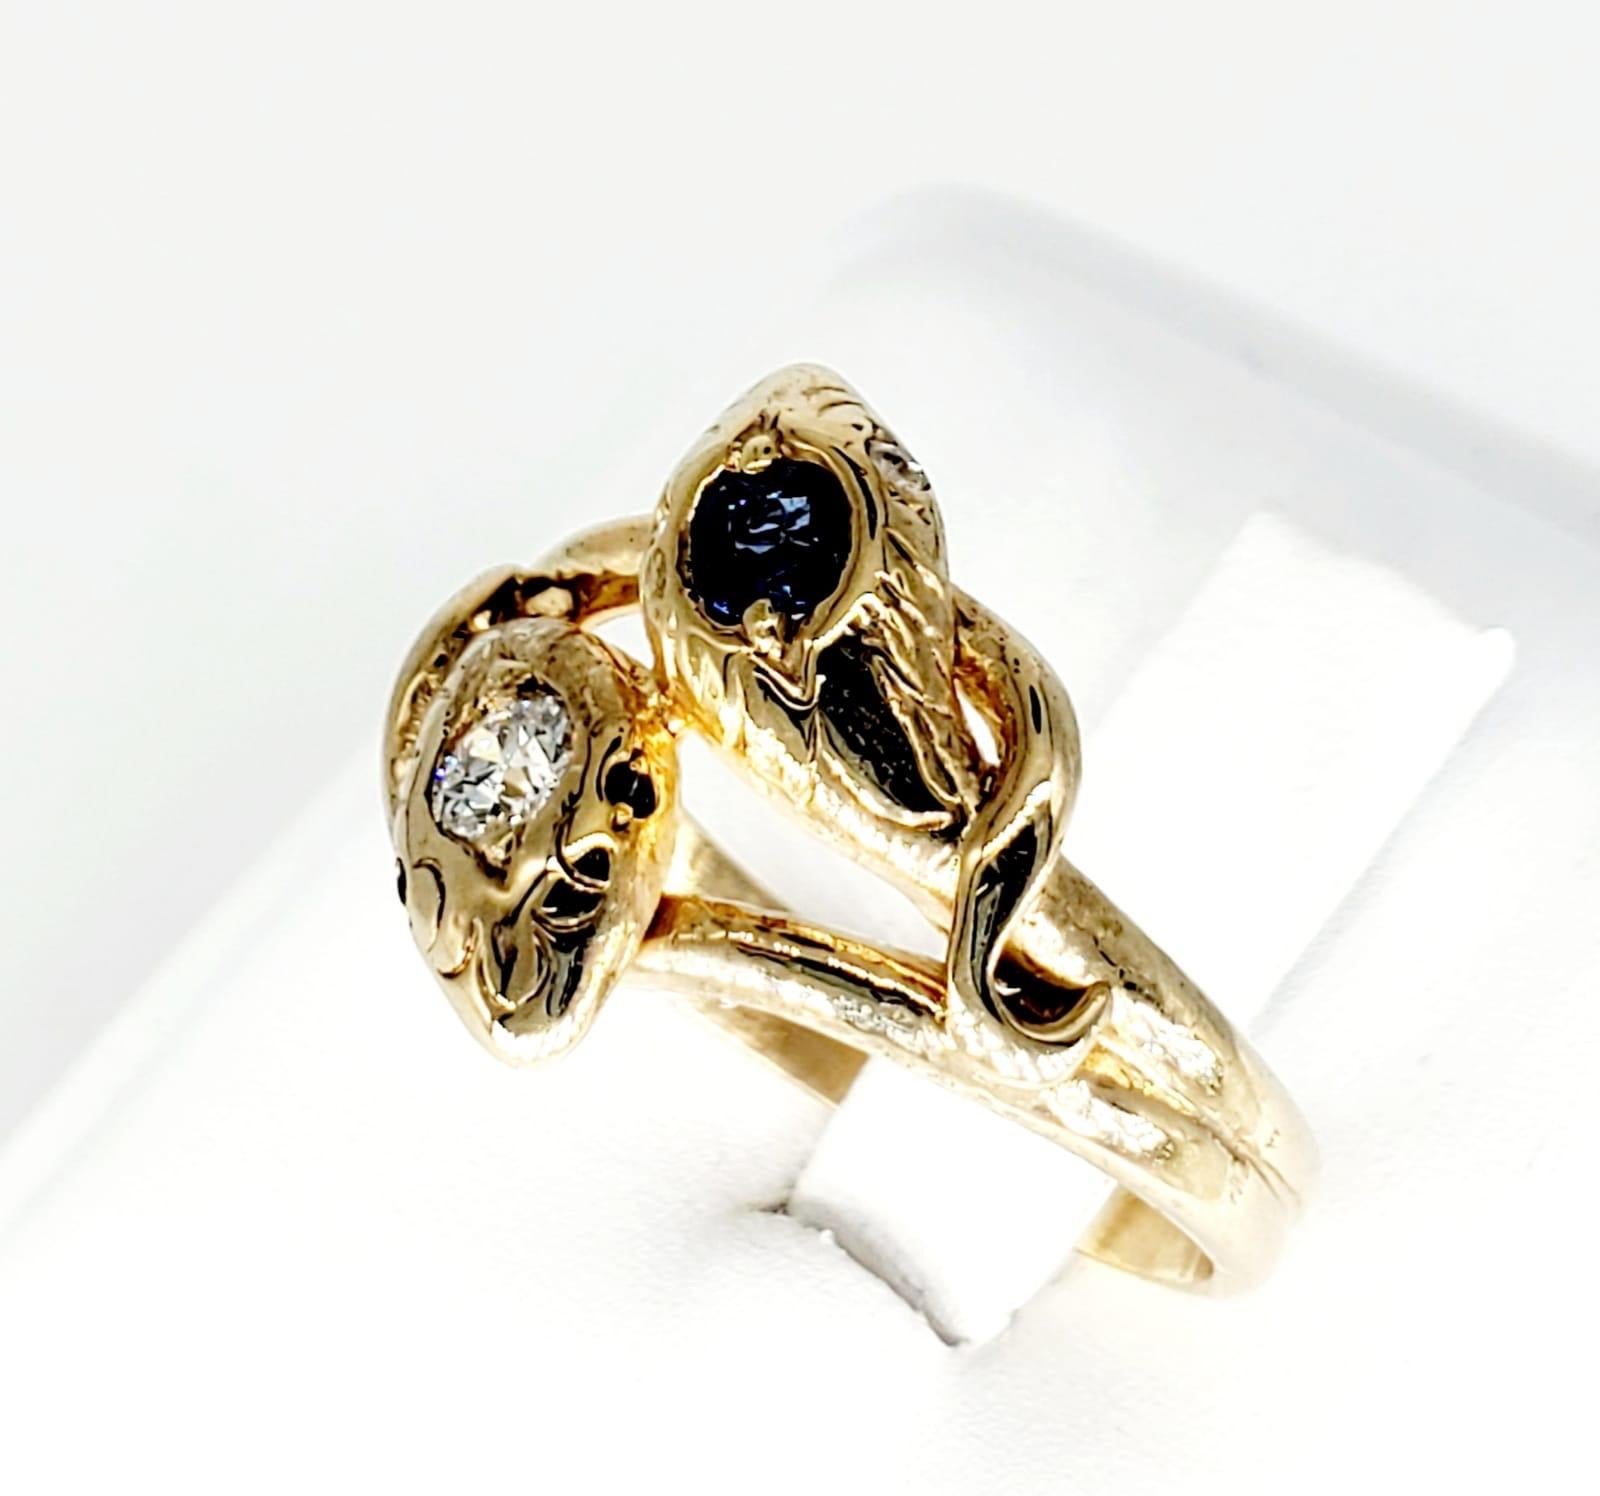 Retro 0.60 Carat Diamond and Sapphire Snake Ring 18 Karat Gold In Excellent Condition For Sale In Miami, FL